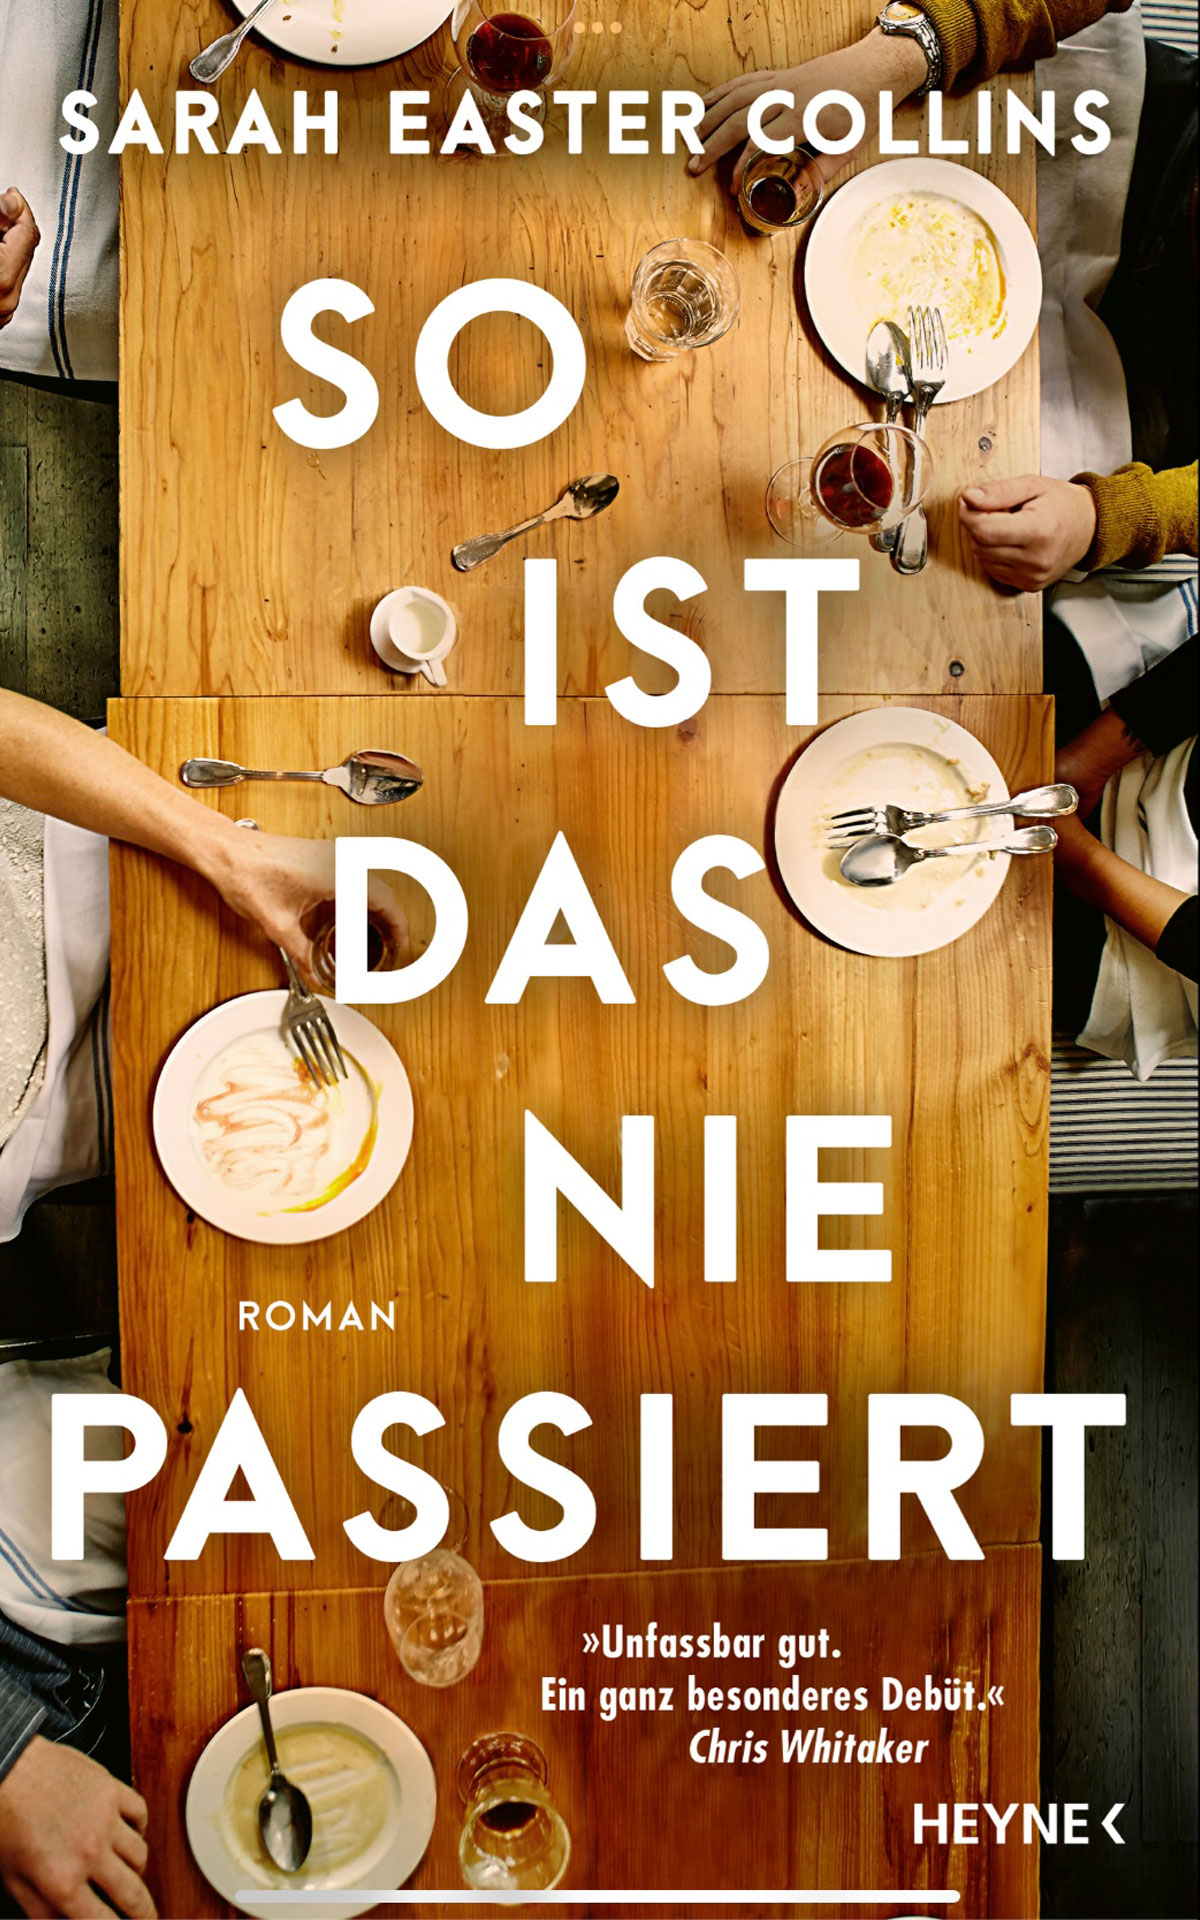 Things Don't Break on their Own by Sarah Easter Collins - German cover